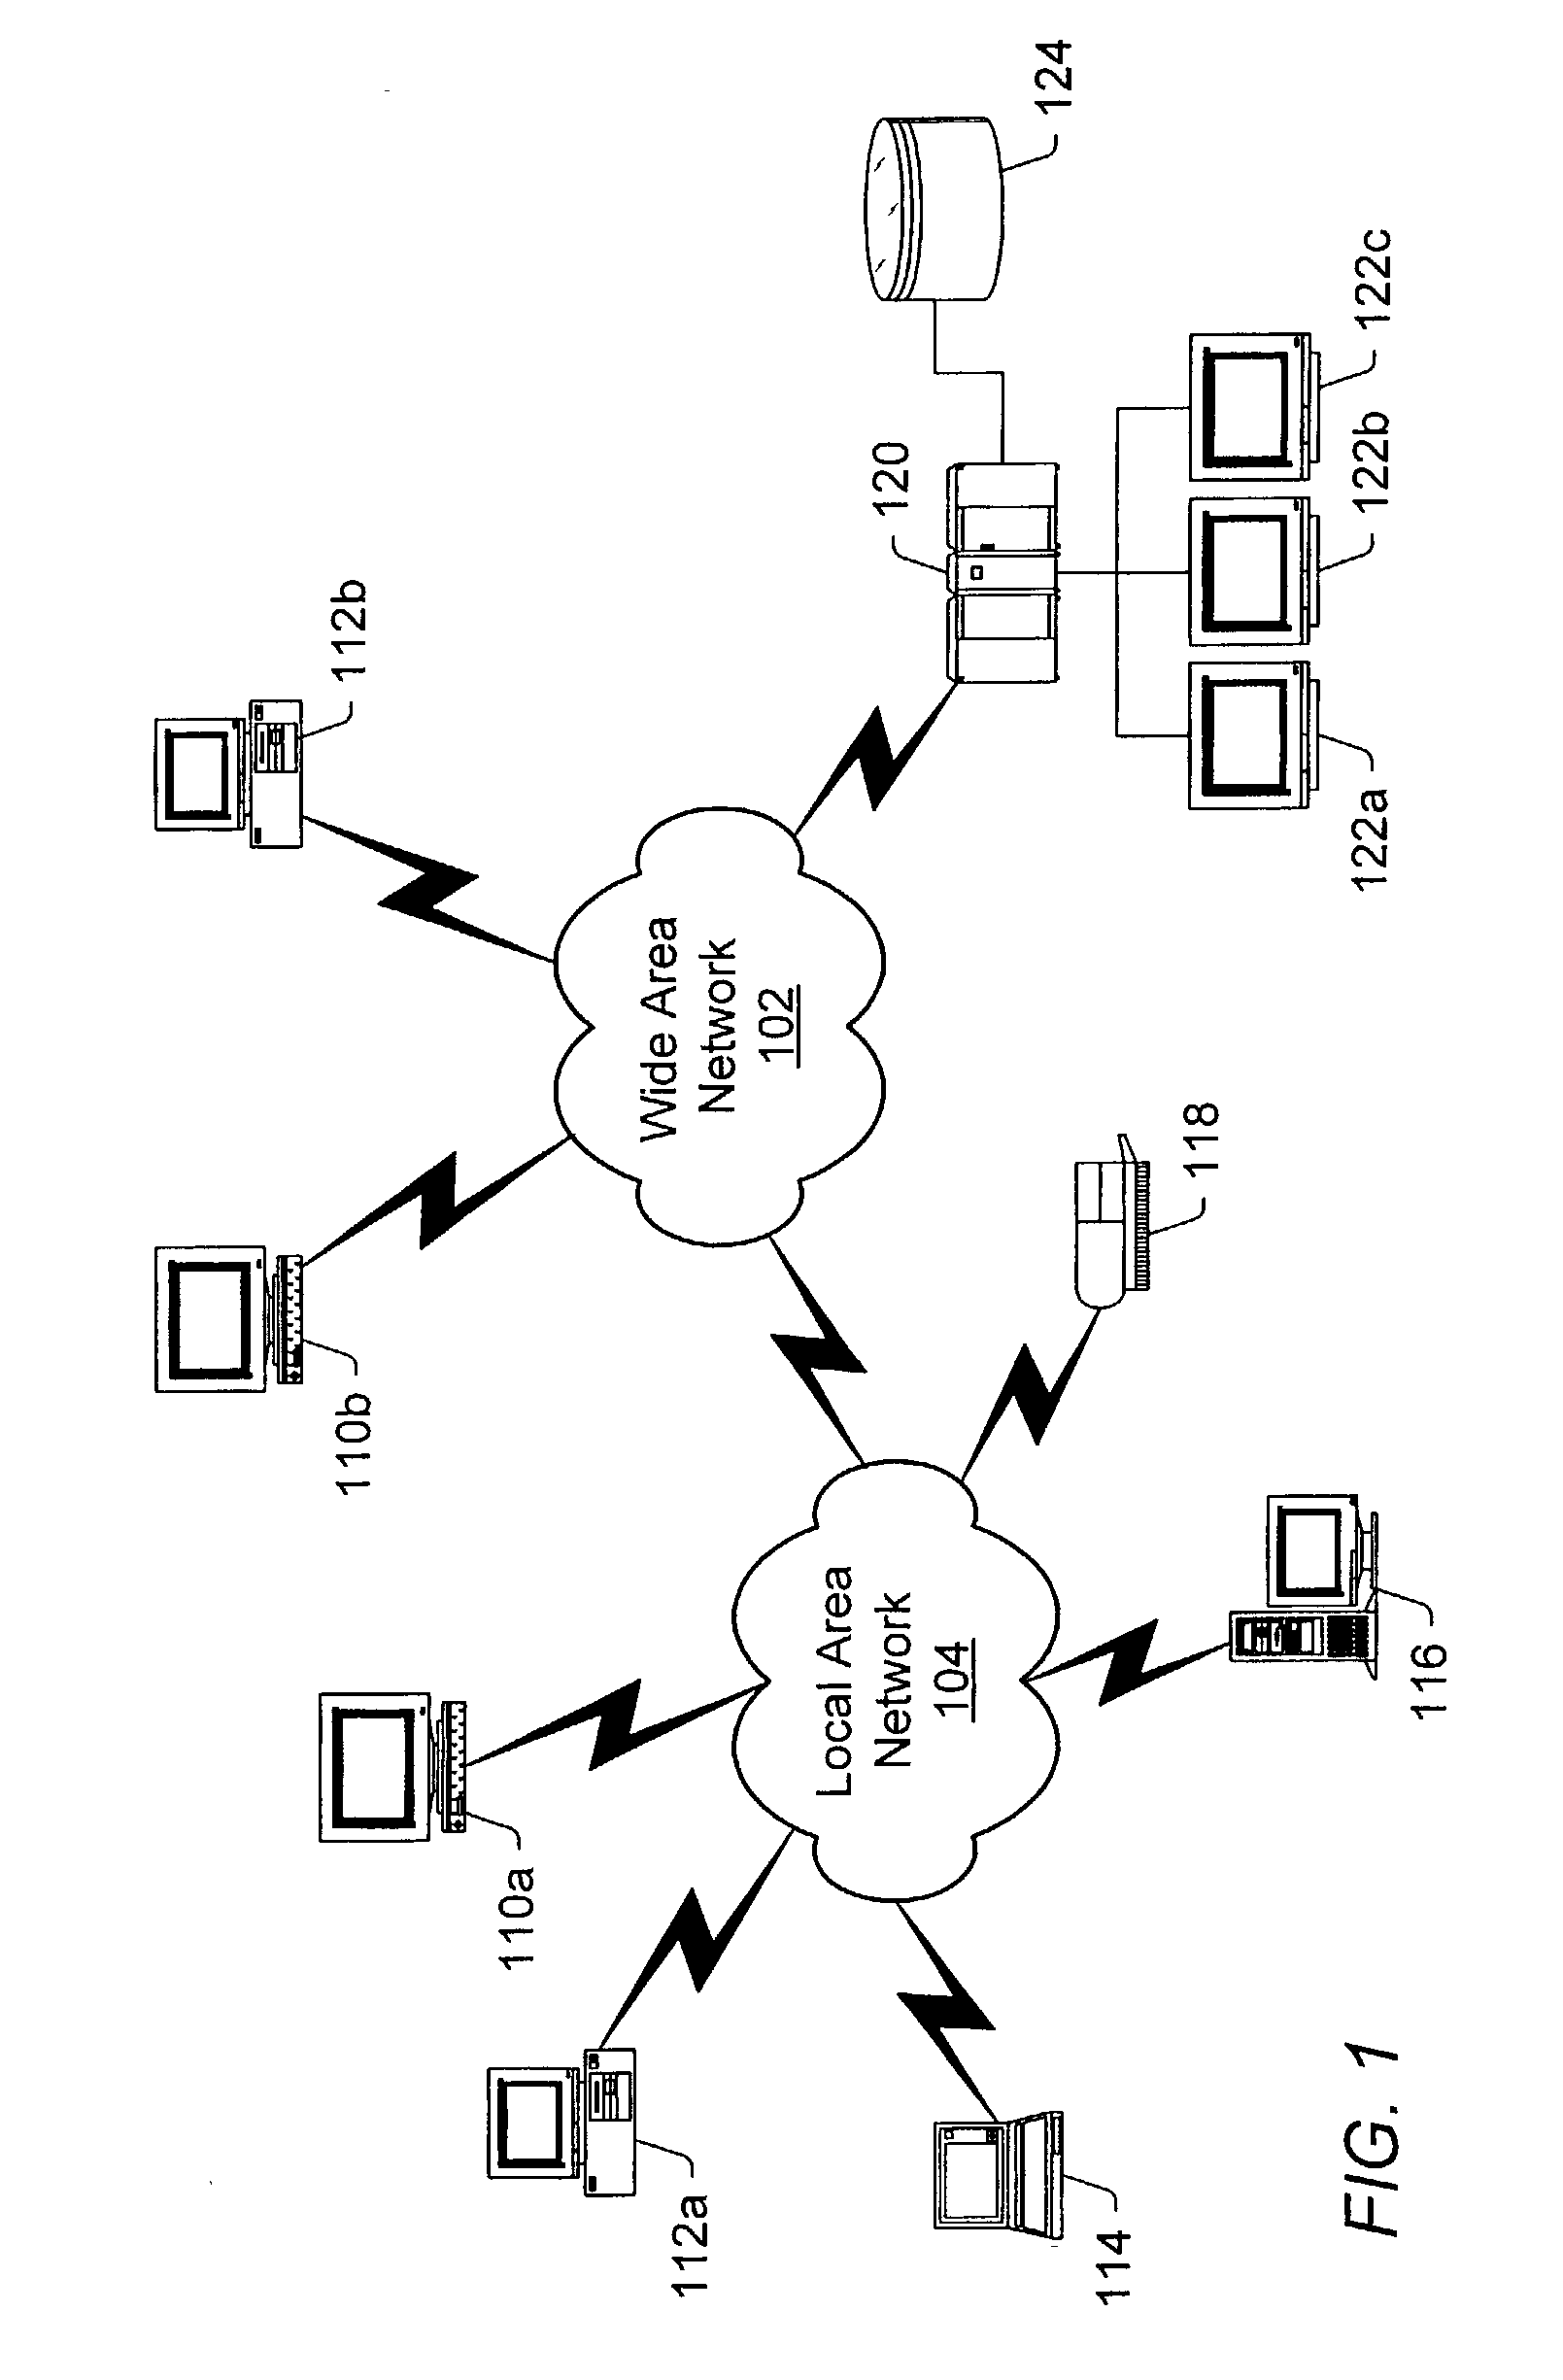 Computerized method and system for estimating an effect on liability using a comparison of the actual speed of a vehicle in an accident and time and distance traveled by the vehicles in a merging vehicle accident